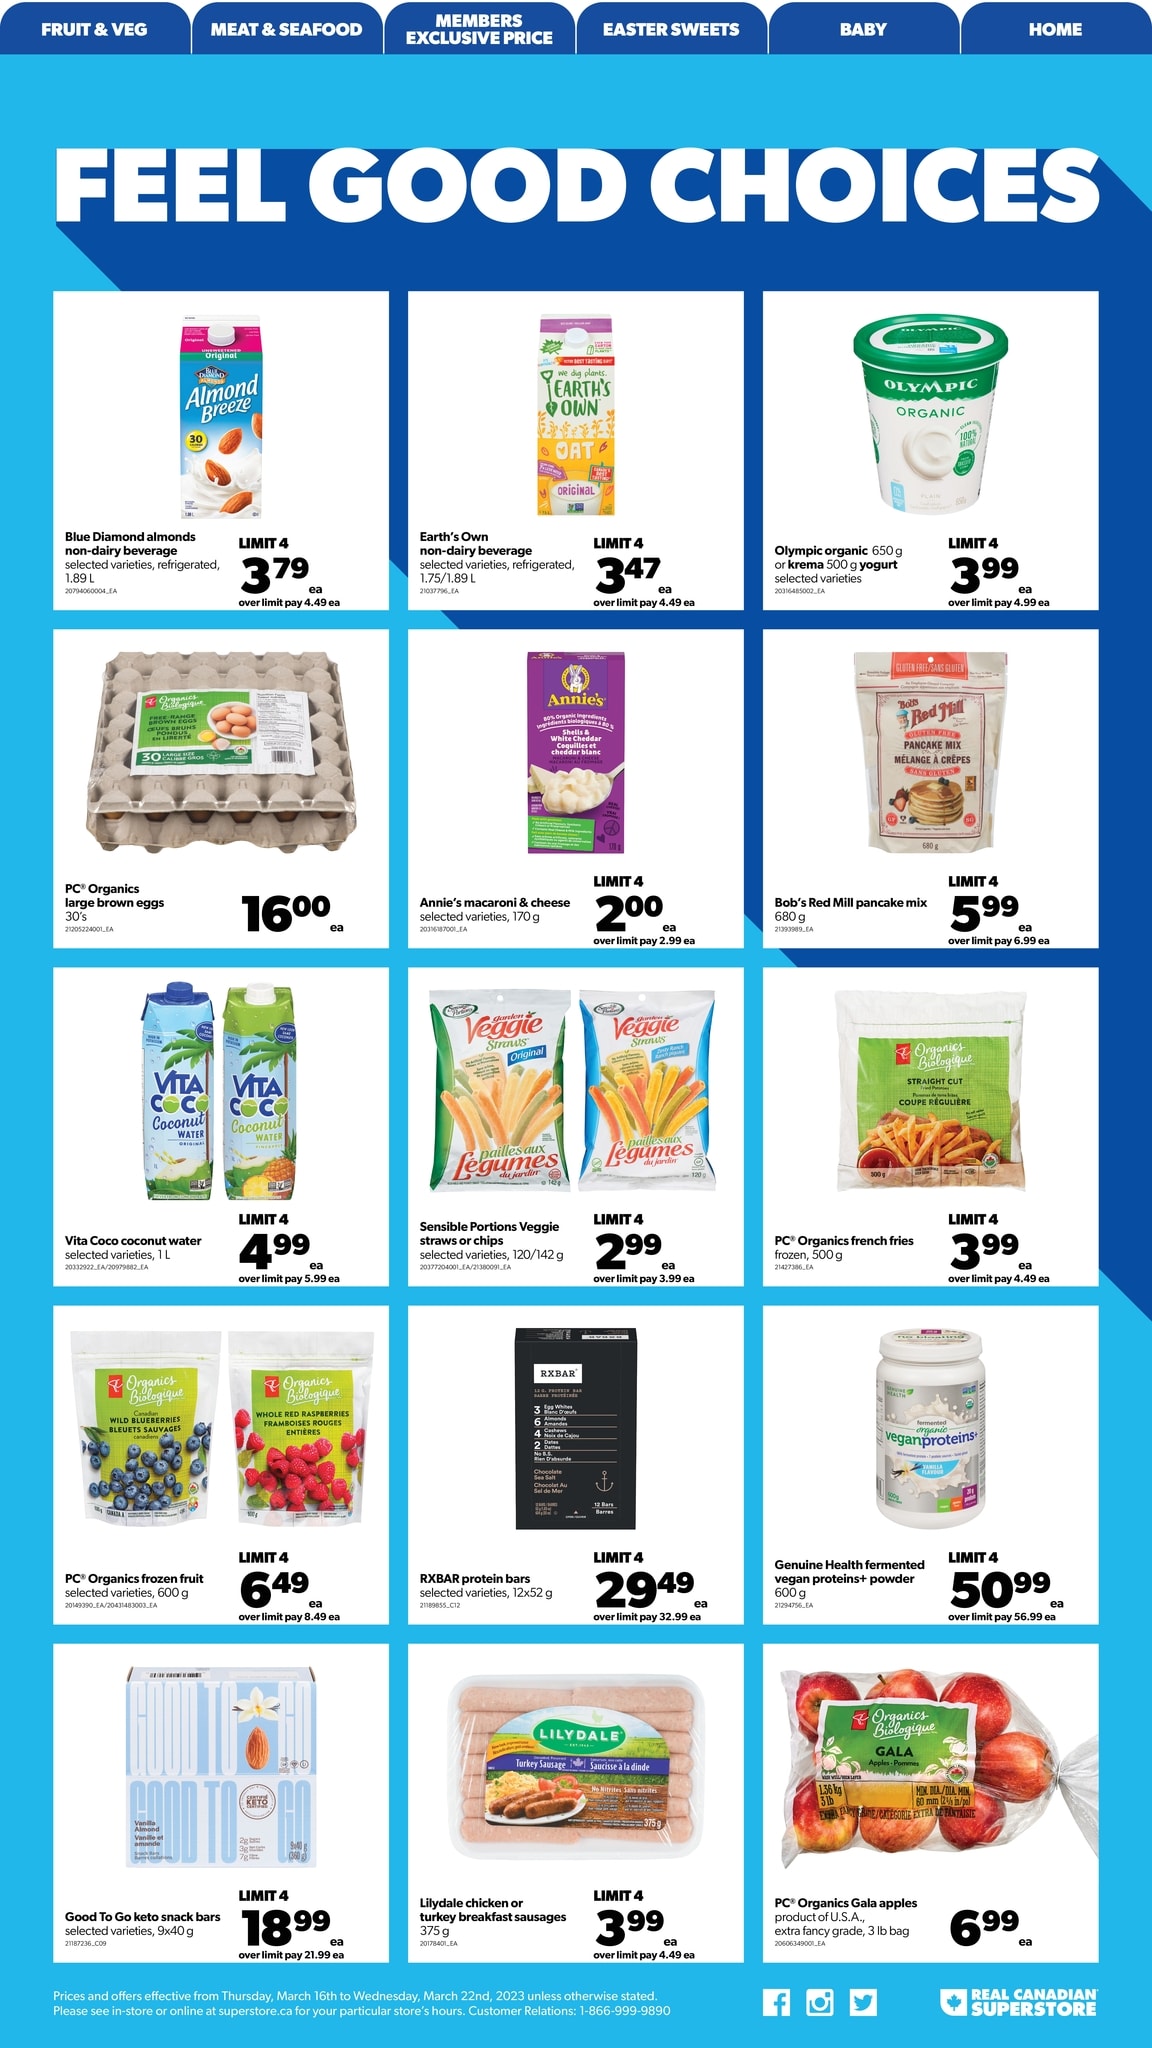 Real Canadian Superstore - Western Canada - Weekly Flyer Specials - Page 13